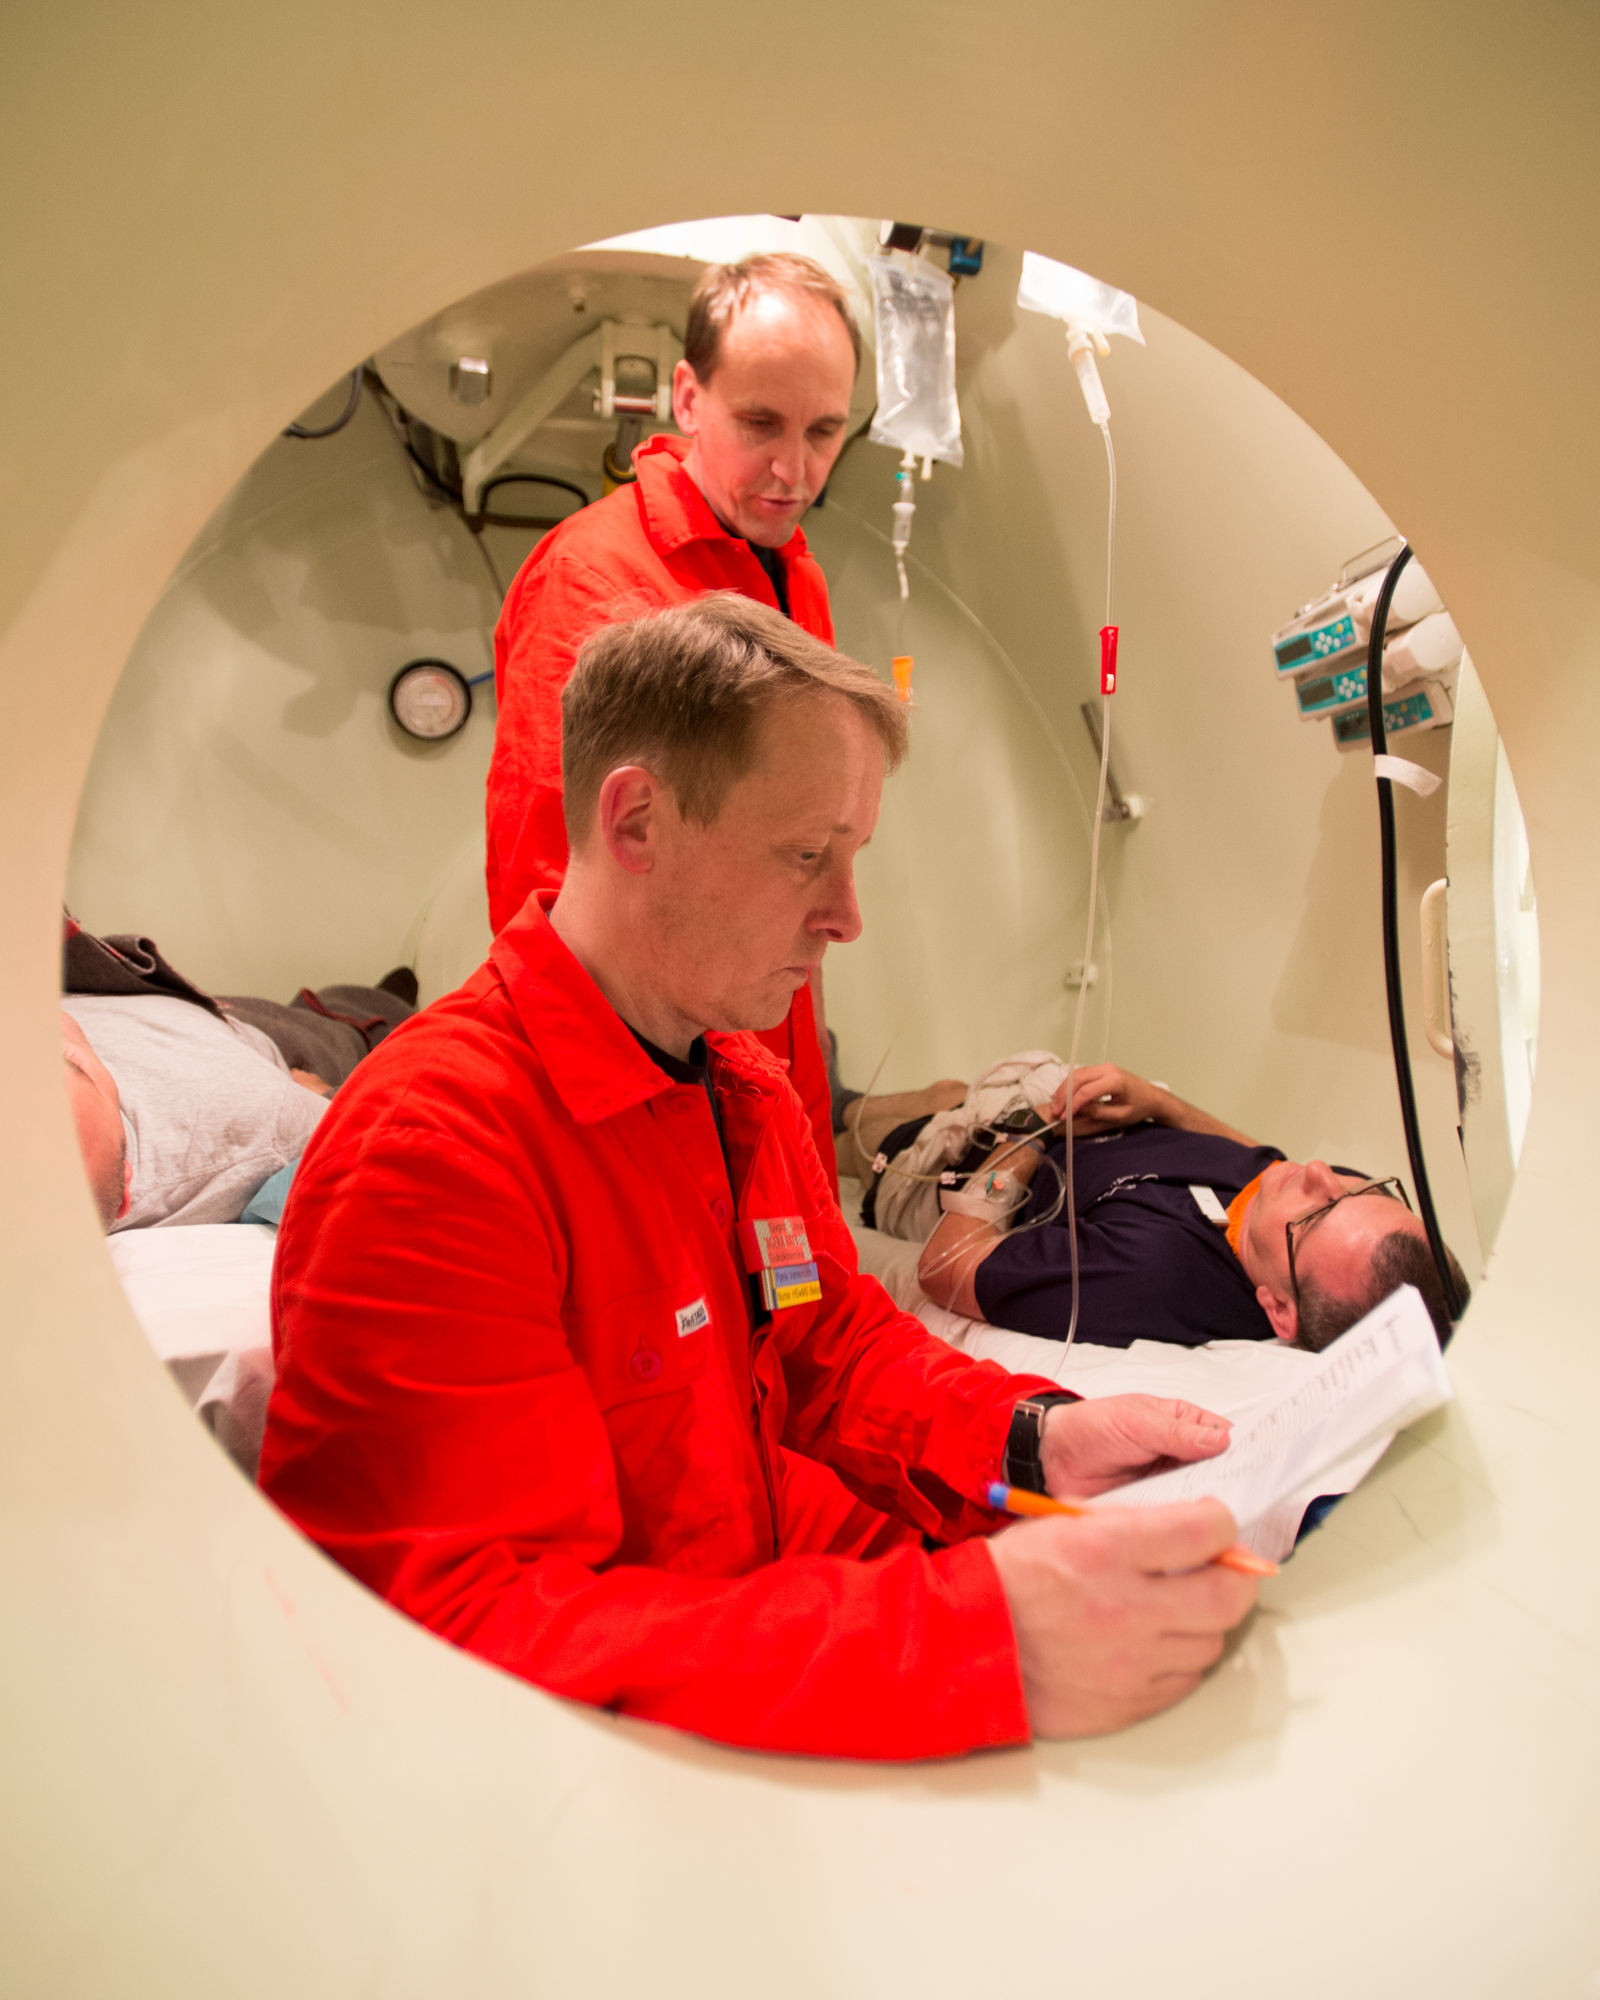 Medics inside decompression chamber on board HMS Belos during submarine rescue exercise Dynamic Monarch, may 2014 © Flt.Sgt Artigues/Fraf